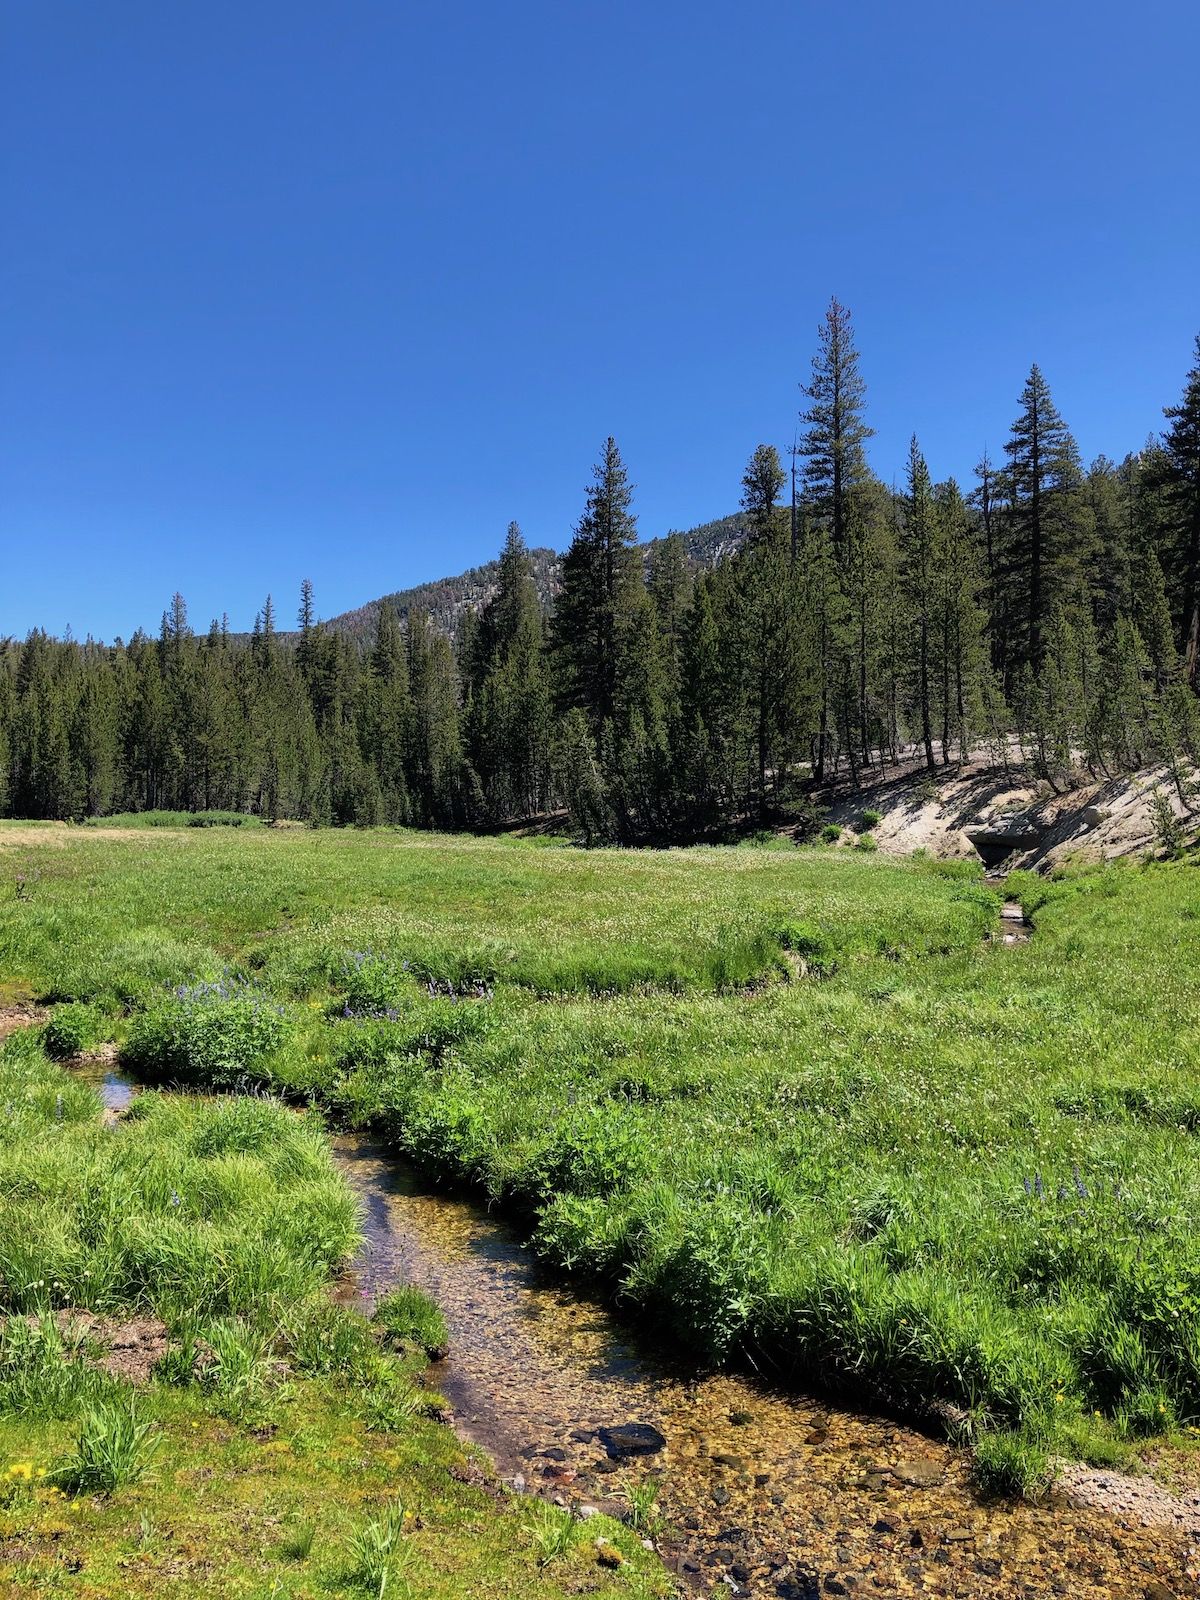 After a long dry stretch, the trail came to a meadow with a stream.